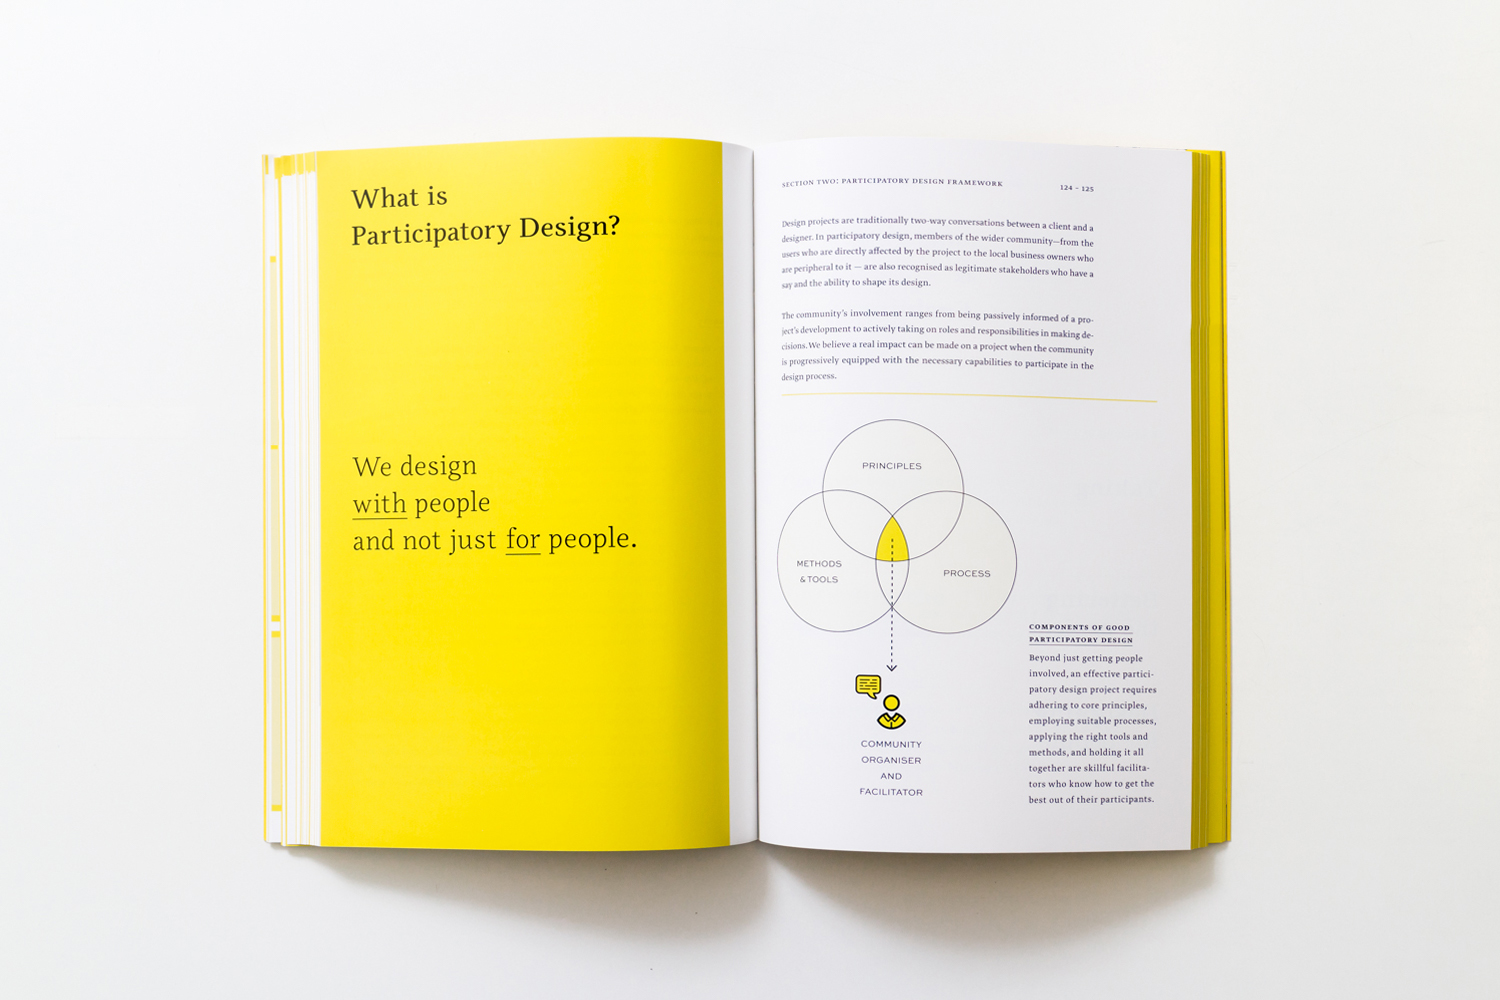 Designing with People and Not Just for People by Participate in Design